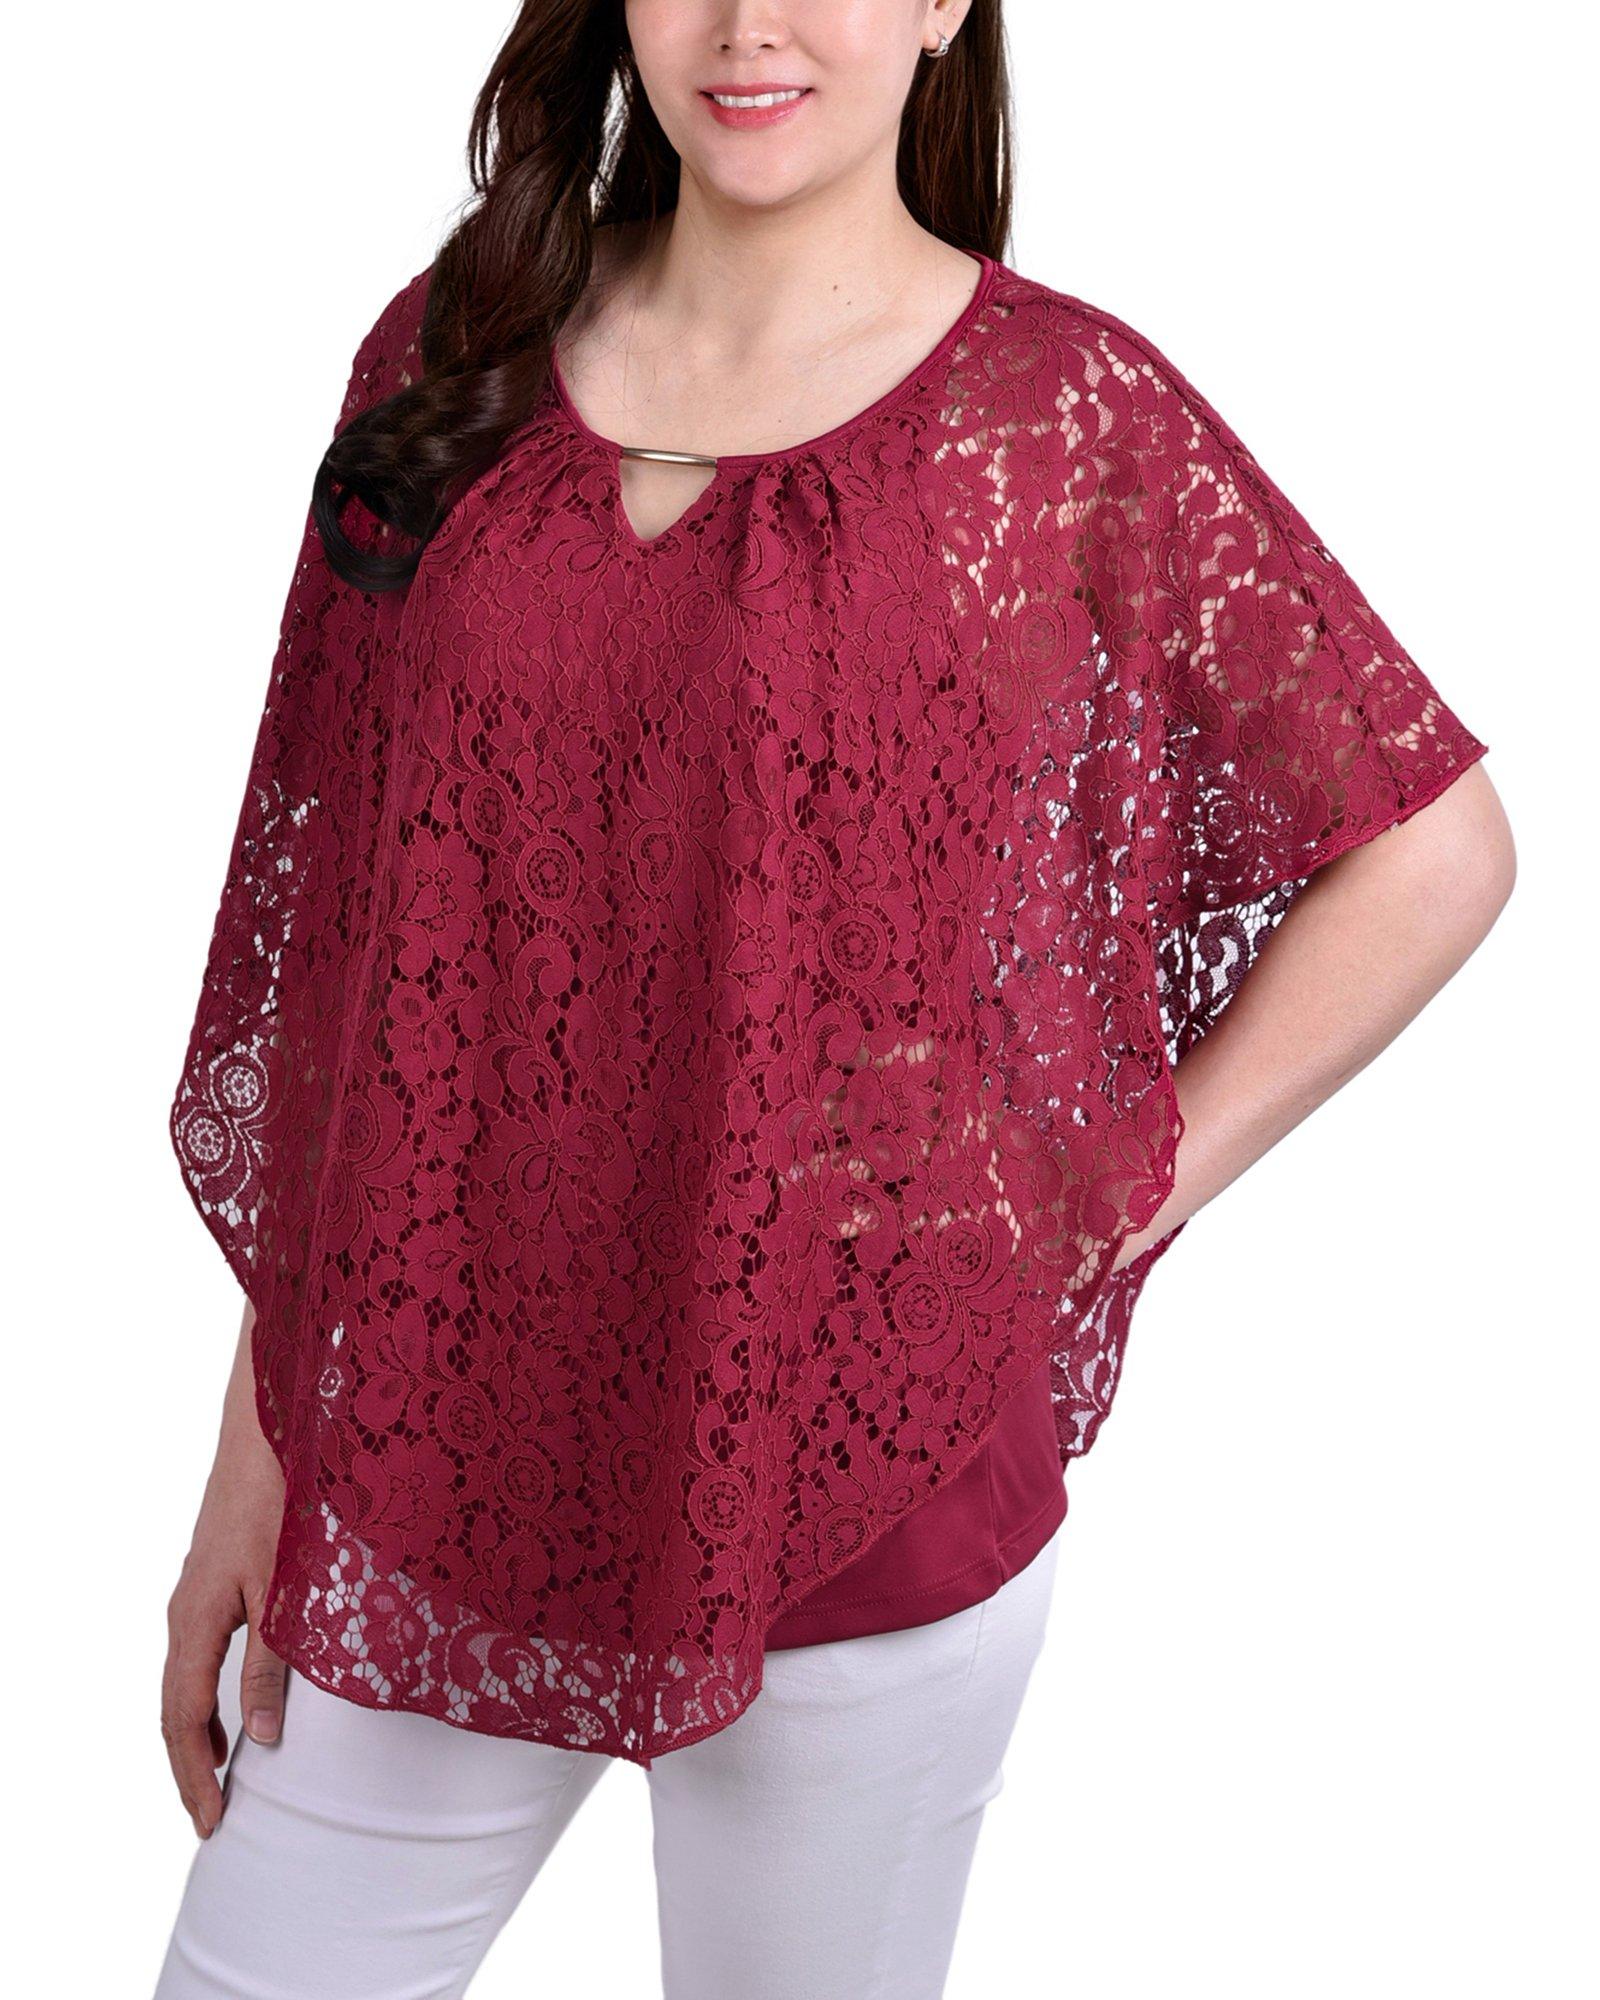 NY Collection Womens Lace Poncho & Tank Top